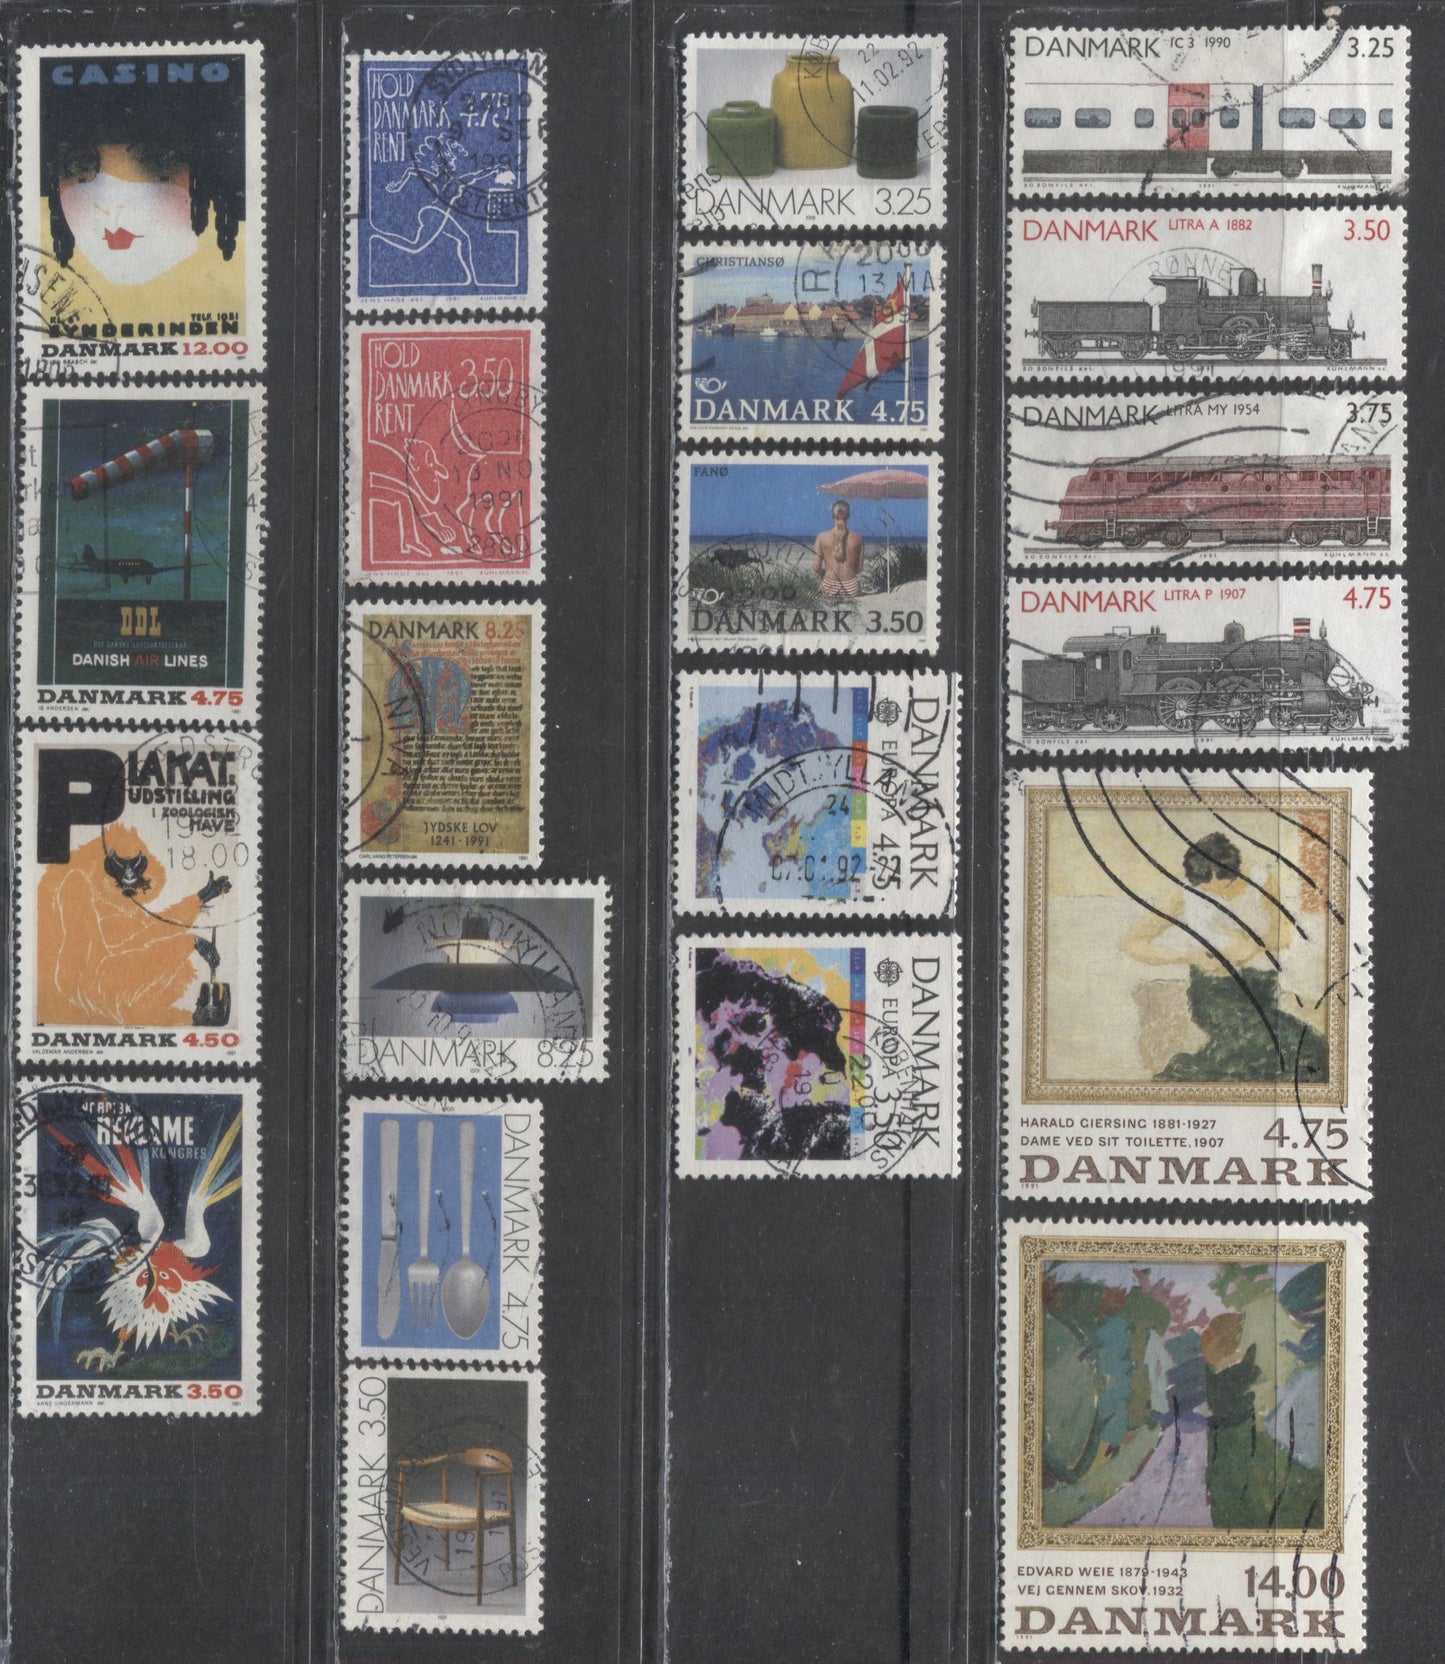 Lot 469 Denmark SC#932-952 1991 Commemoratives, 20 Fine/Very Fine Used Singles, Click on Listing to See ALL Pictures, 2017 Scott Cat. $33.25 USD